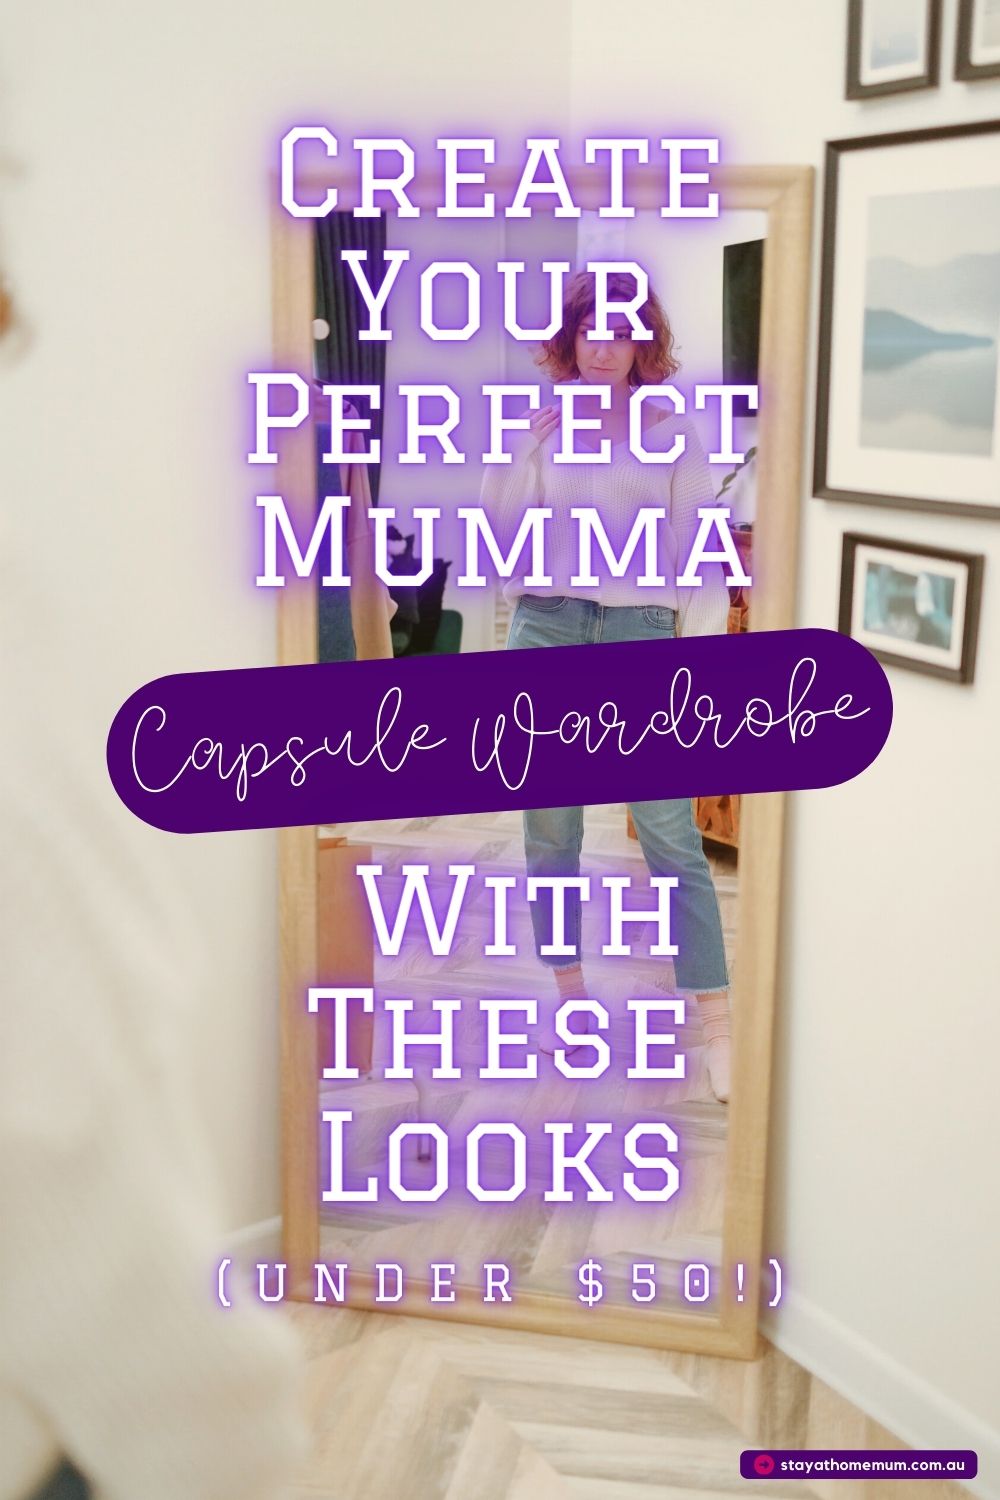 Create Your Perfect Mumma Capsule Wardrobe With These Looks (Under $50!) Pinnable